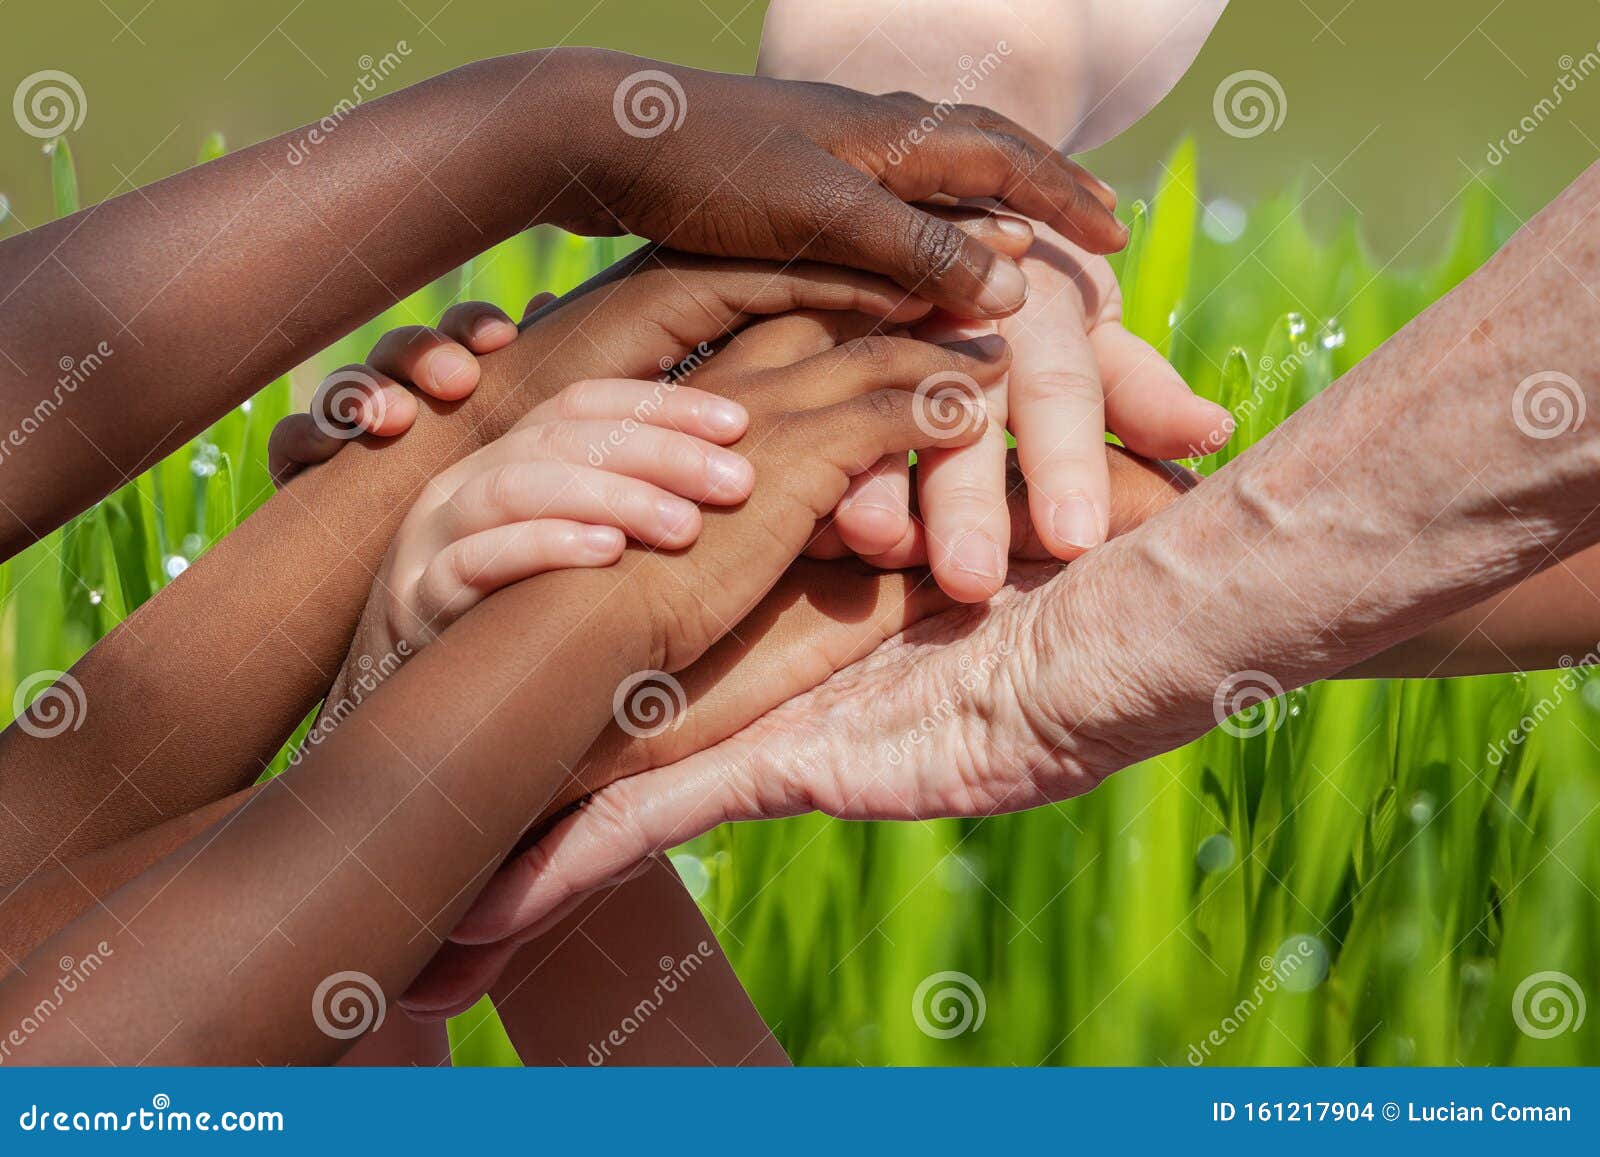 multiracial hands on grass background